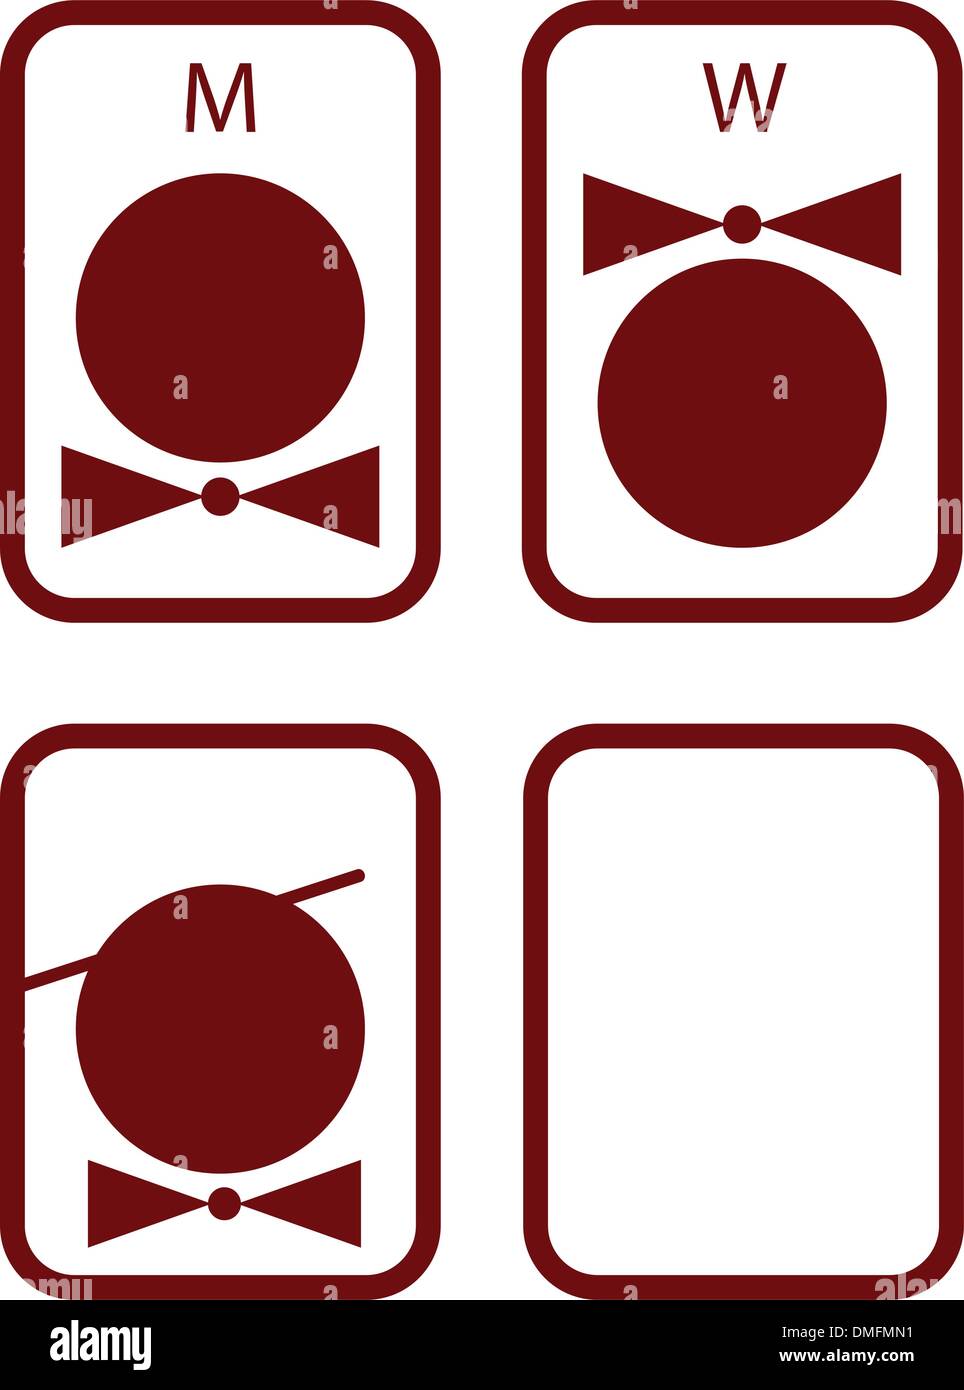 Set of vector icons for WC Stock Vector